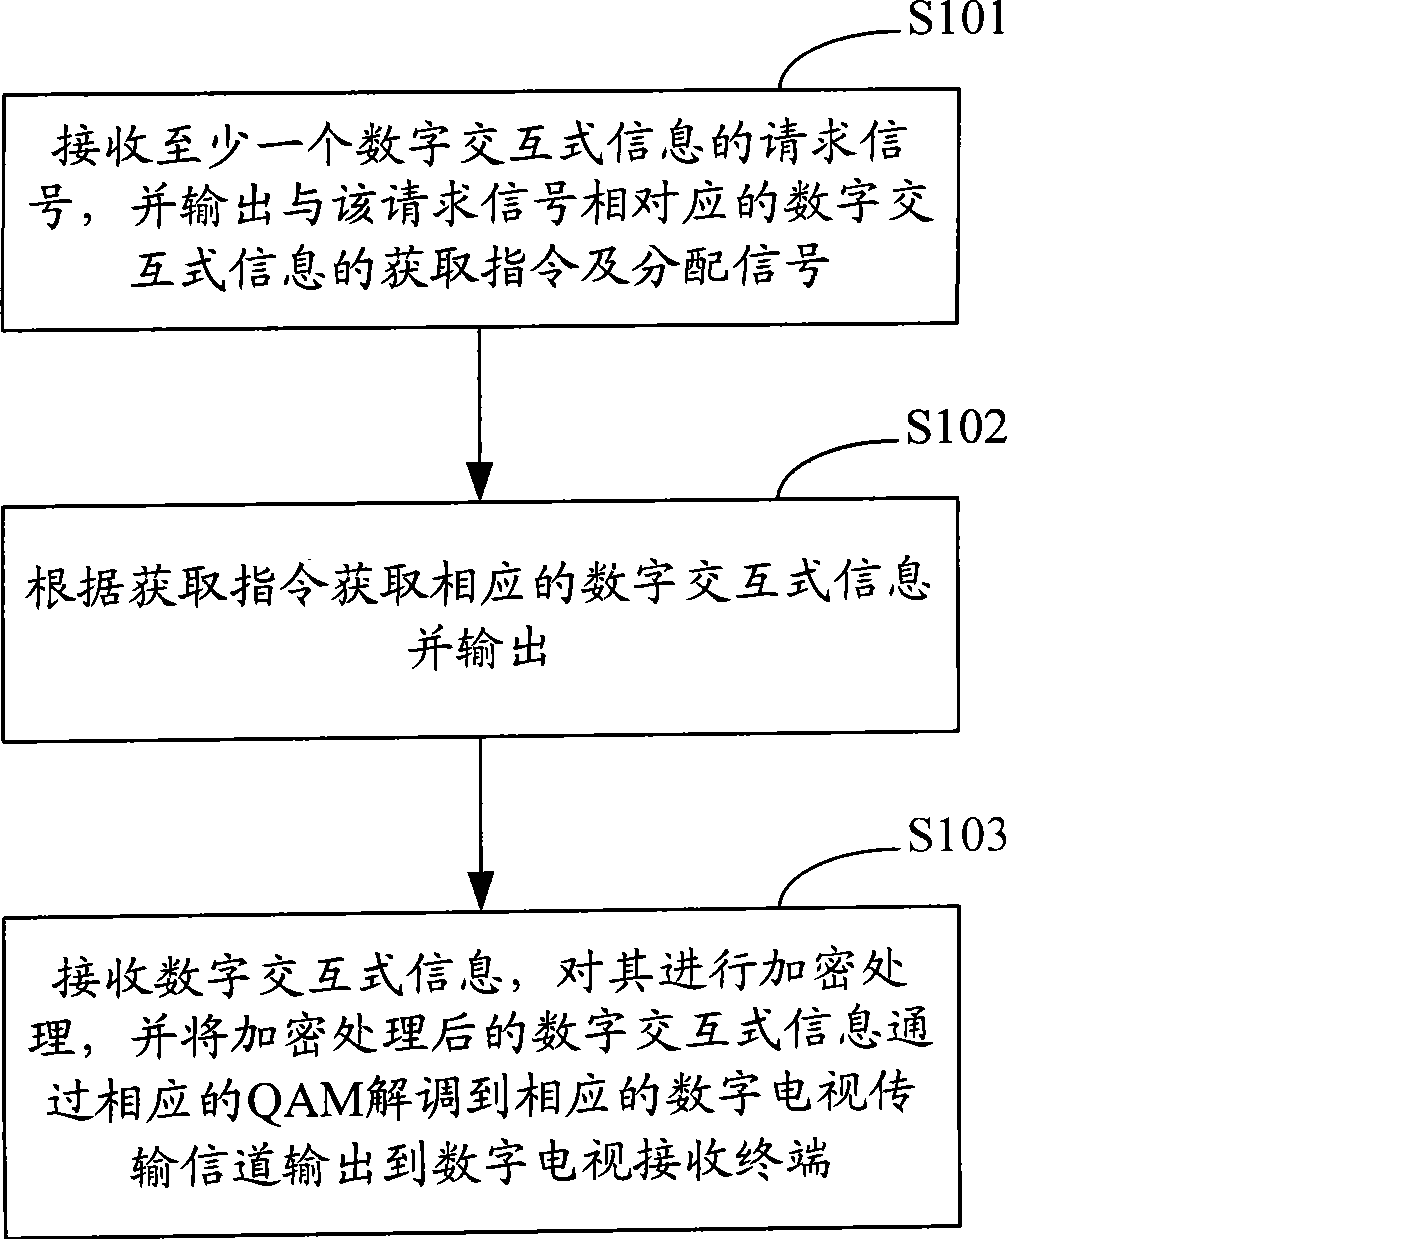 Interactive digital signal transmission method and system